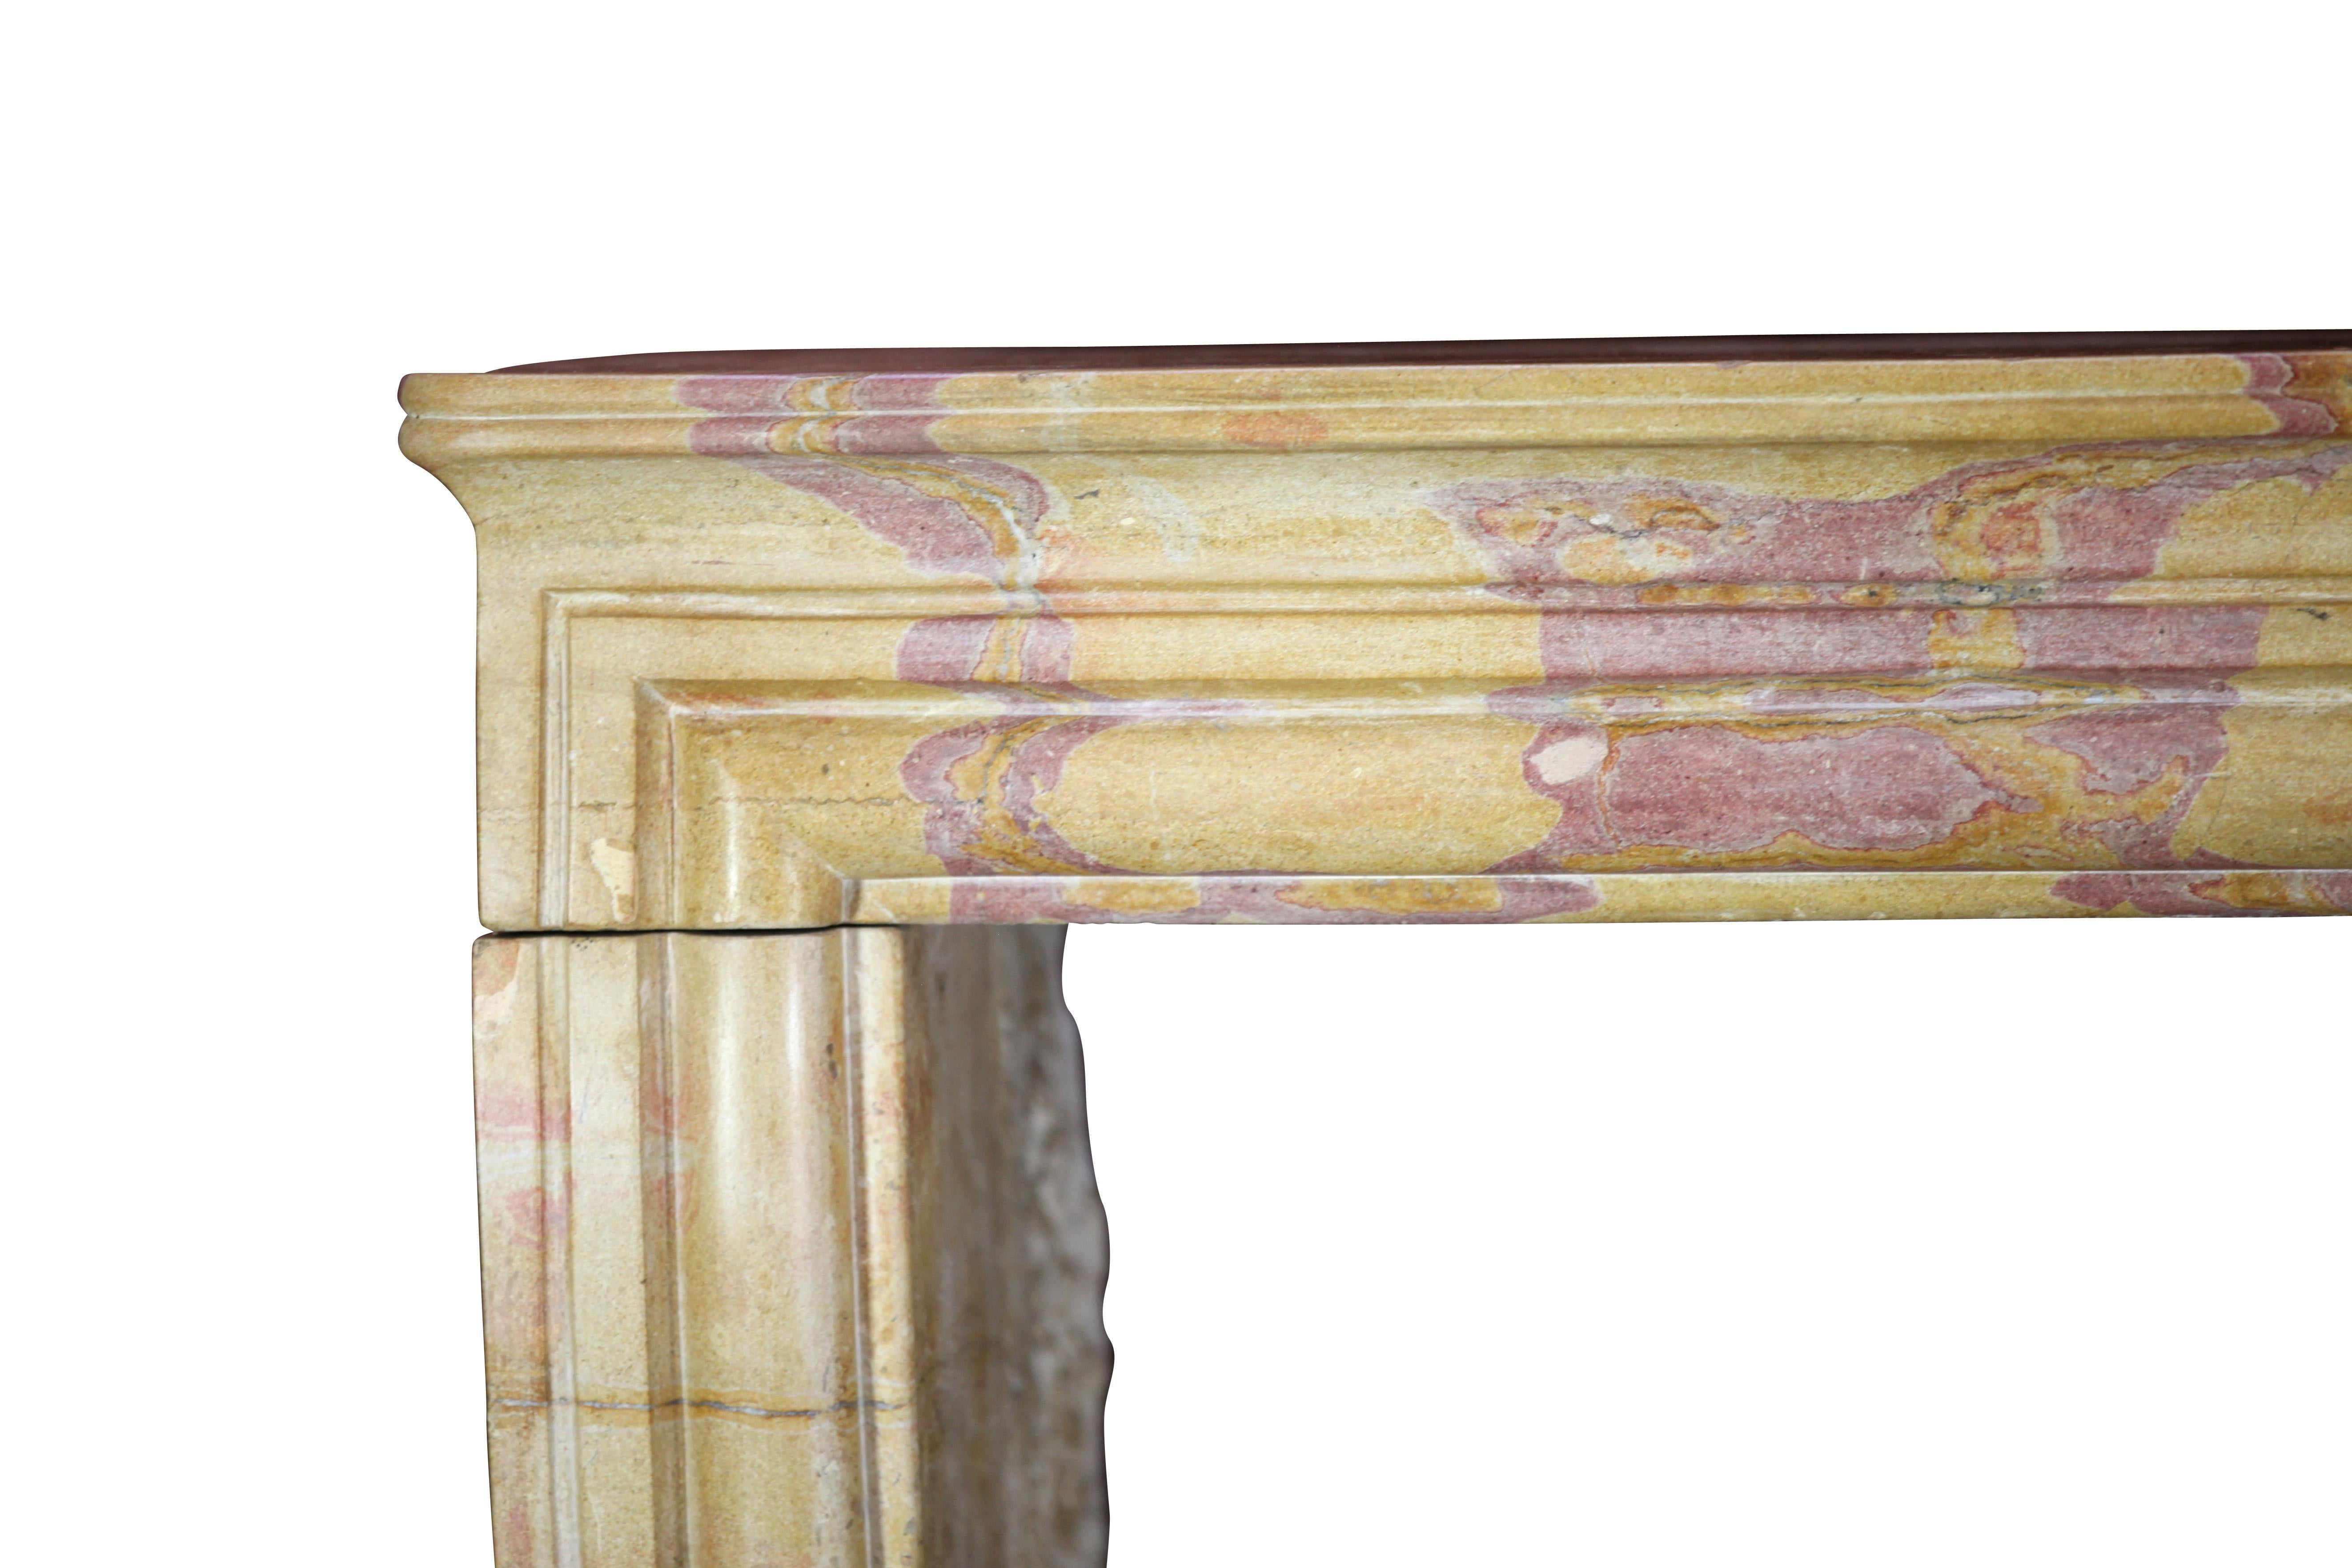 A fine French country surround in Louis XIV style, 19th century. The Burgundy hard stone/ marble is from the Corton region. It is bicolor with some wine color veining.
Measures:
134 cm exterior width 52.76 inch
115 cm exterior height 45.27